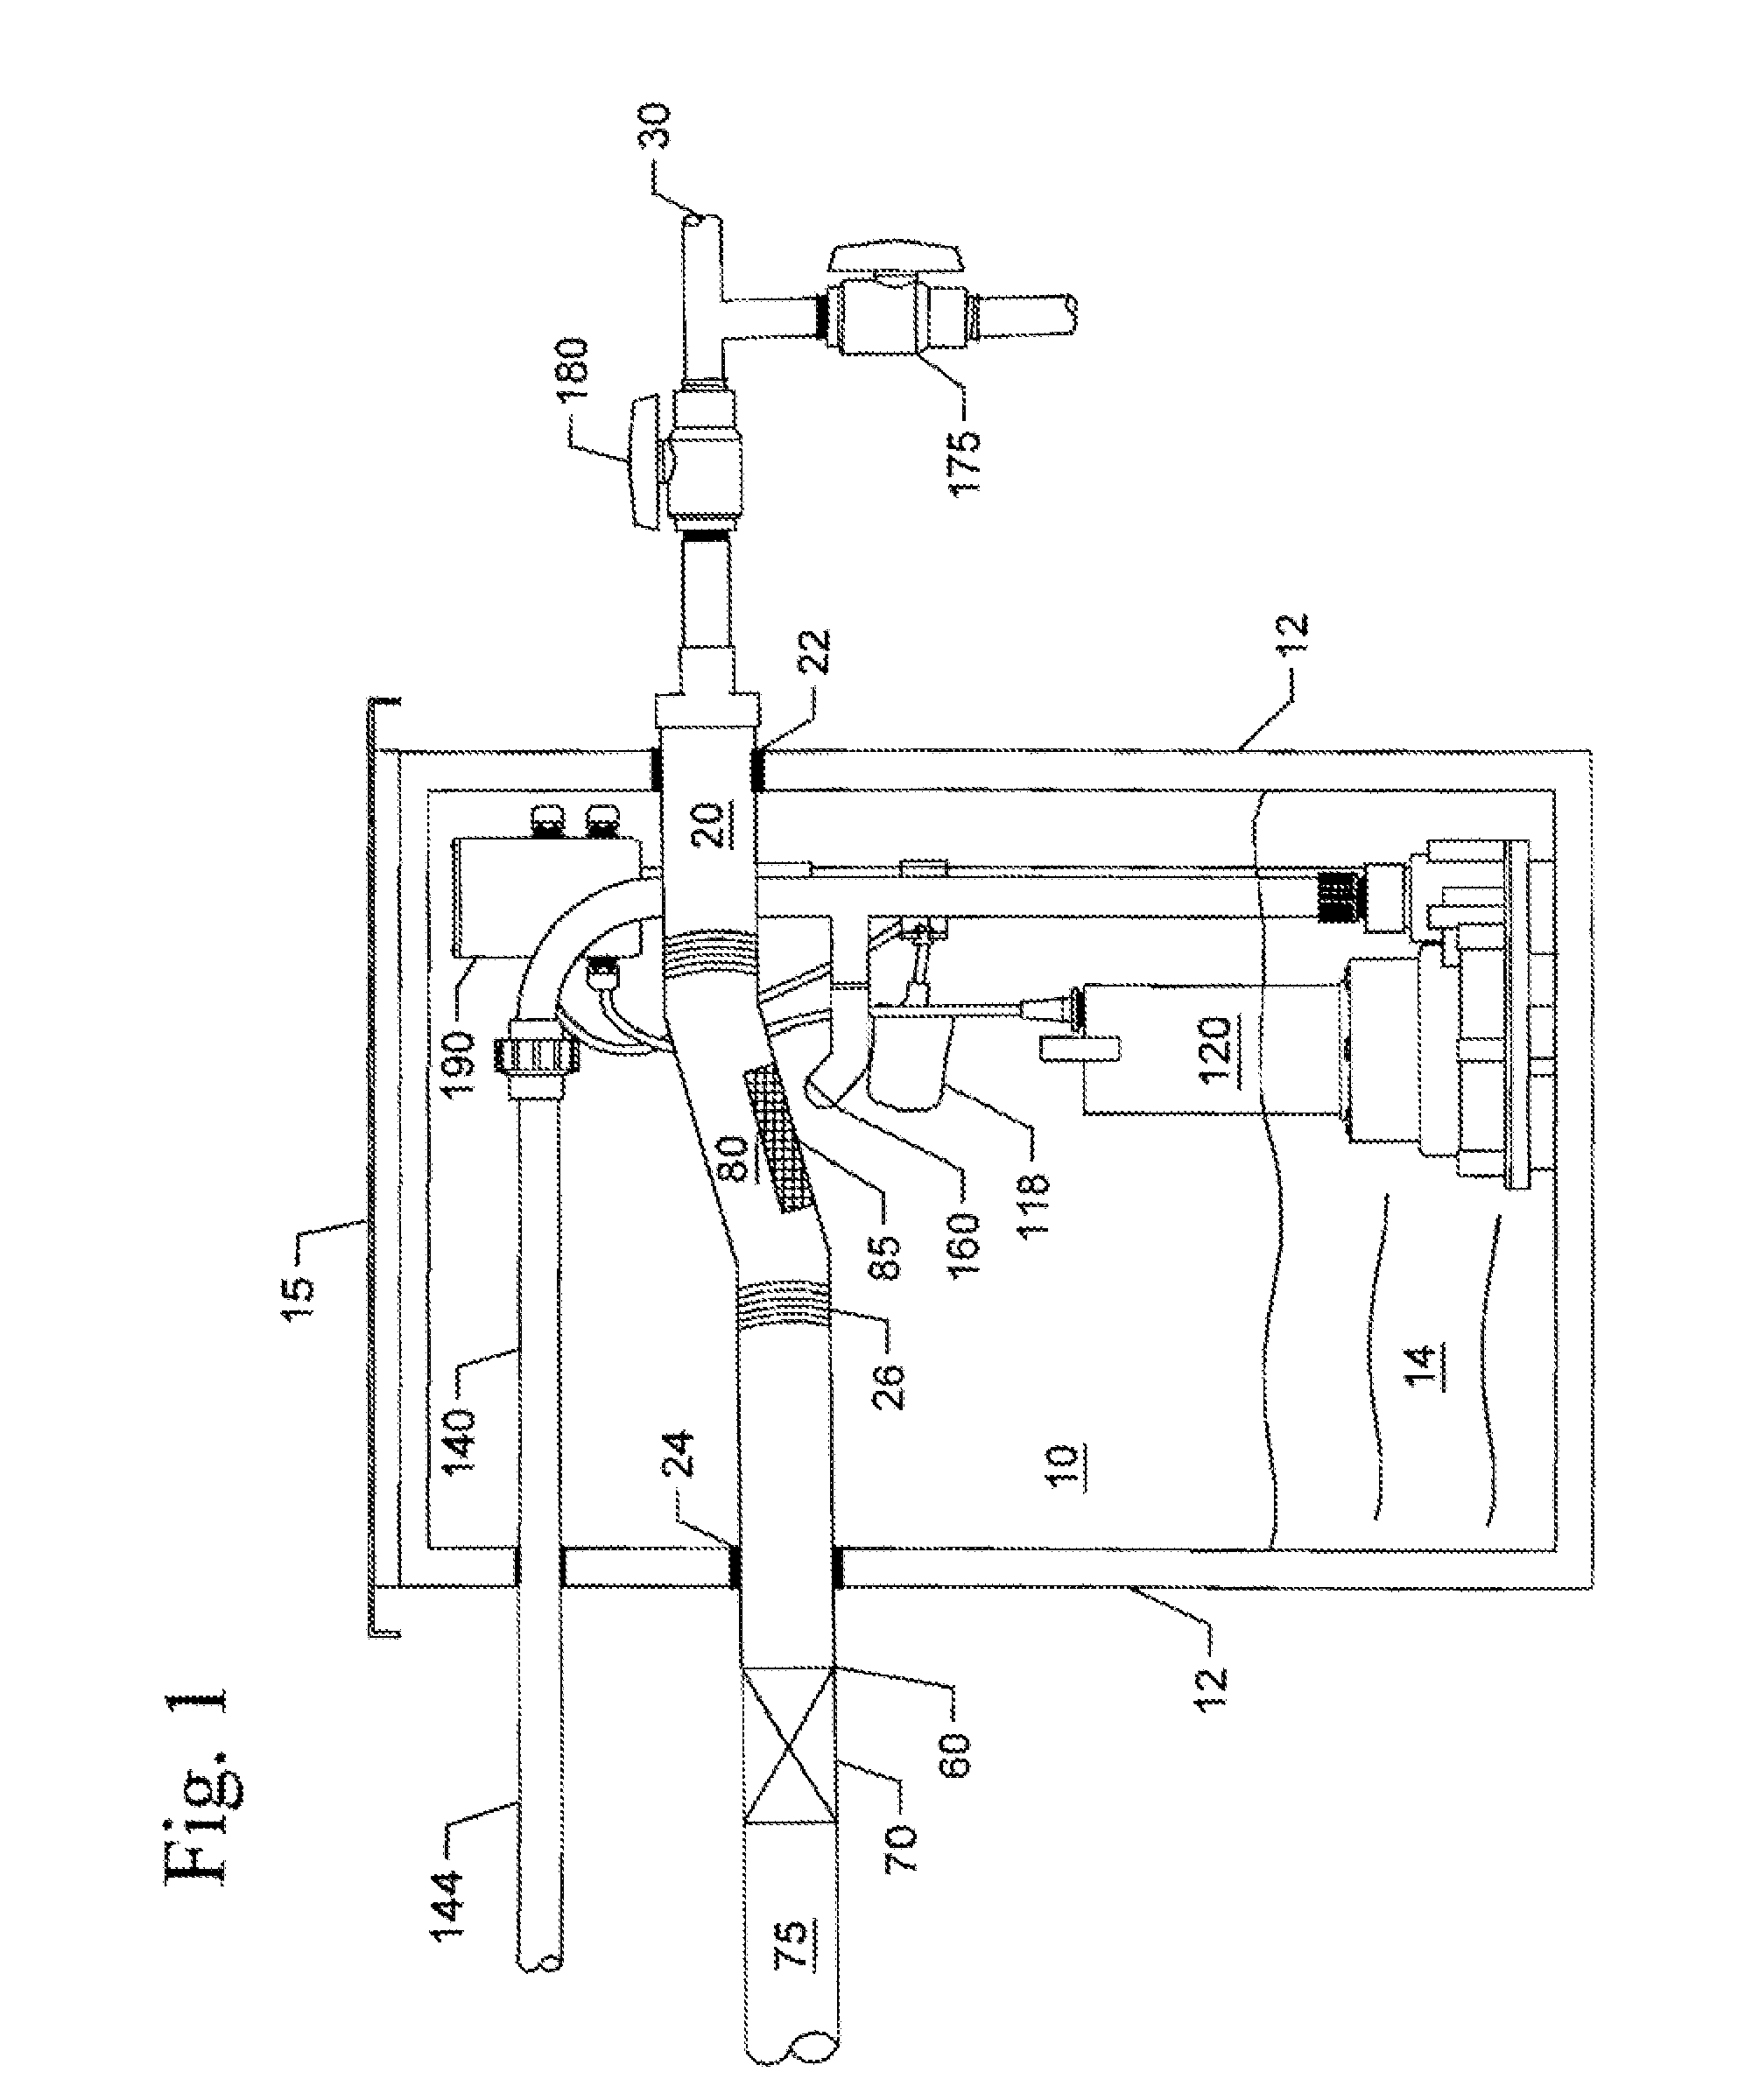 Grey water recycling apparatus and methods